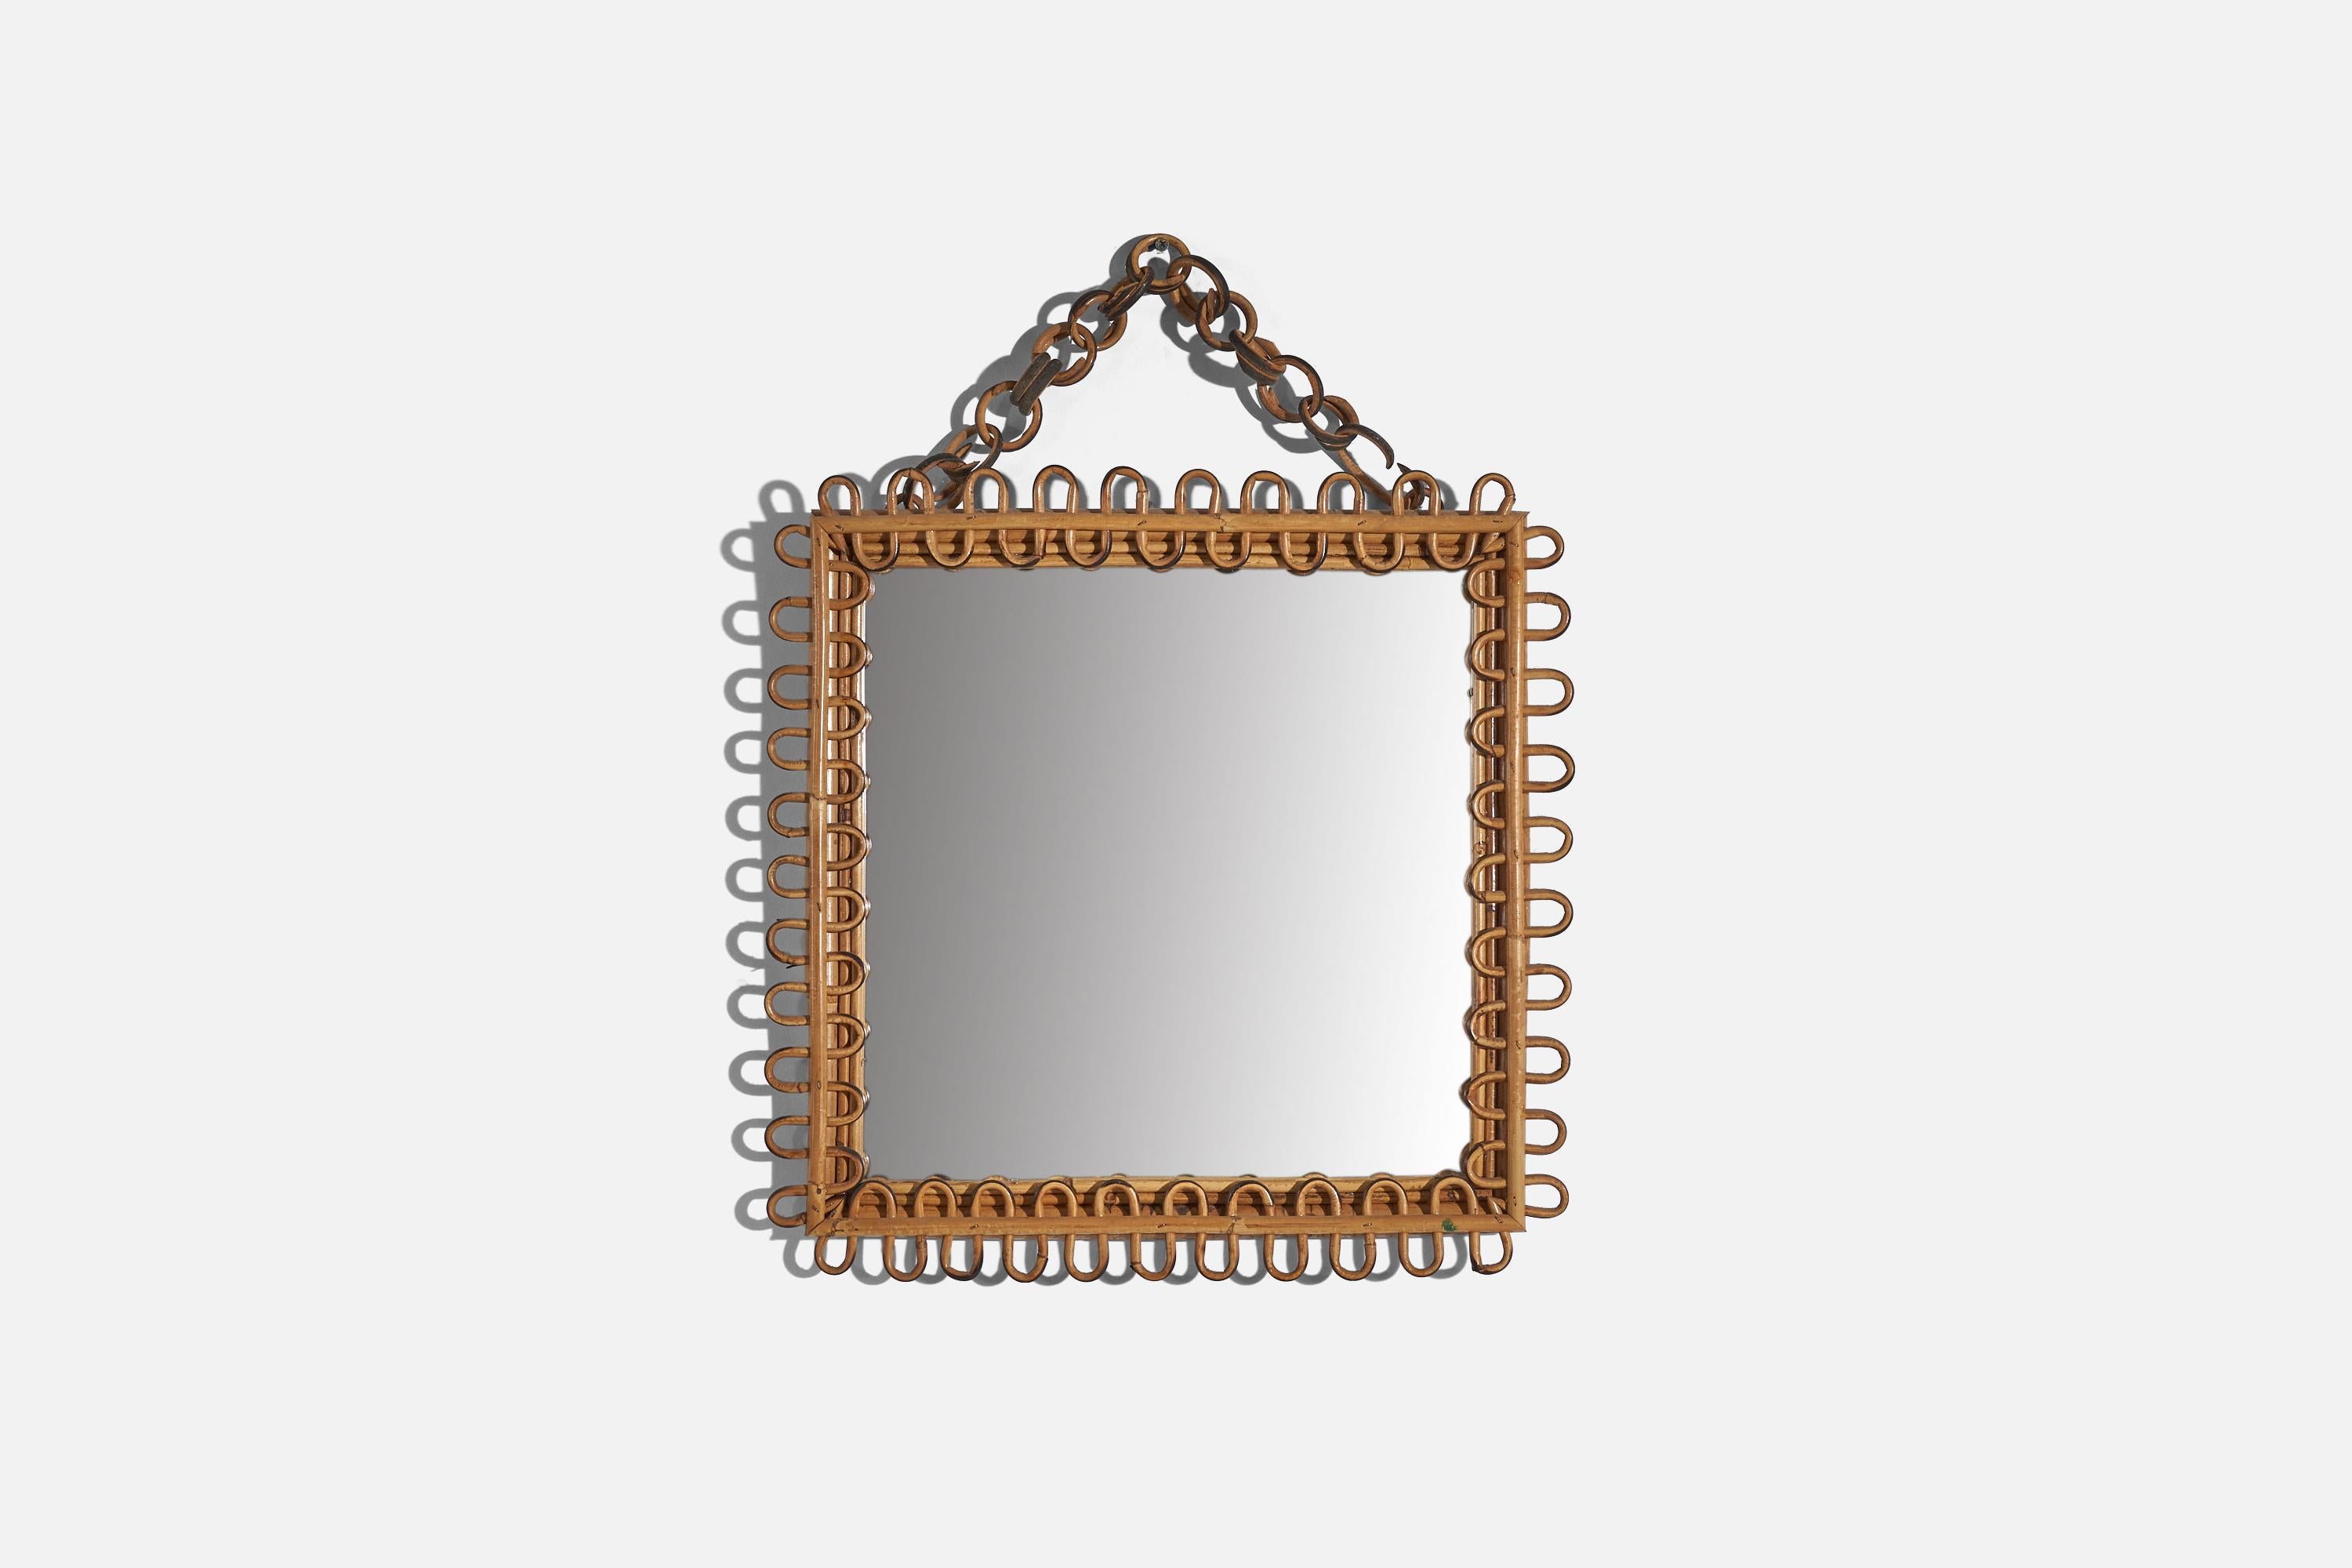 A square, rattan wall mirror designed and produced by an Italian designer, Italy, 1950s-1960s.
   